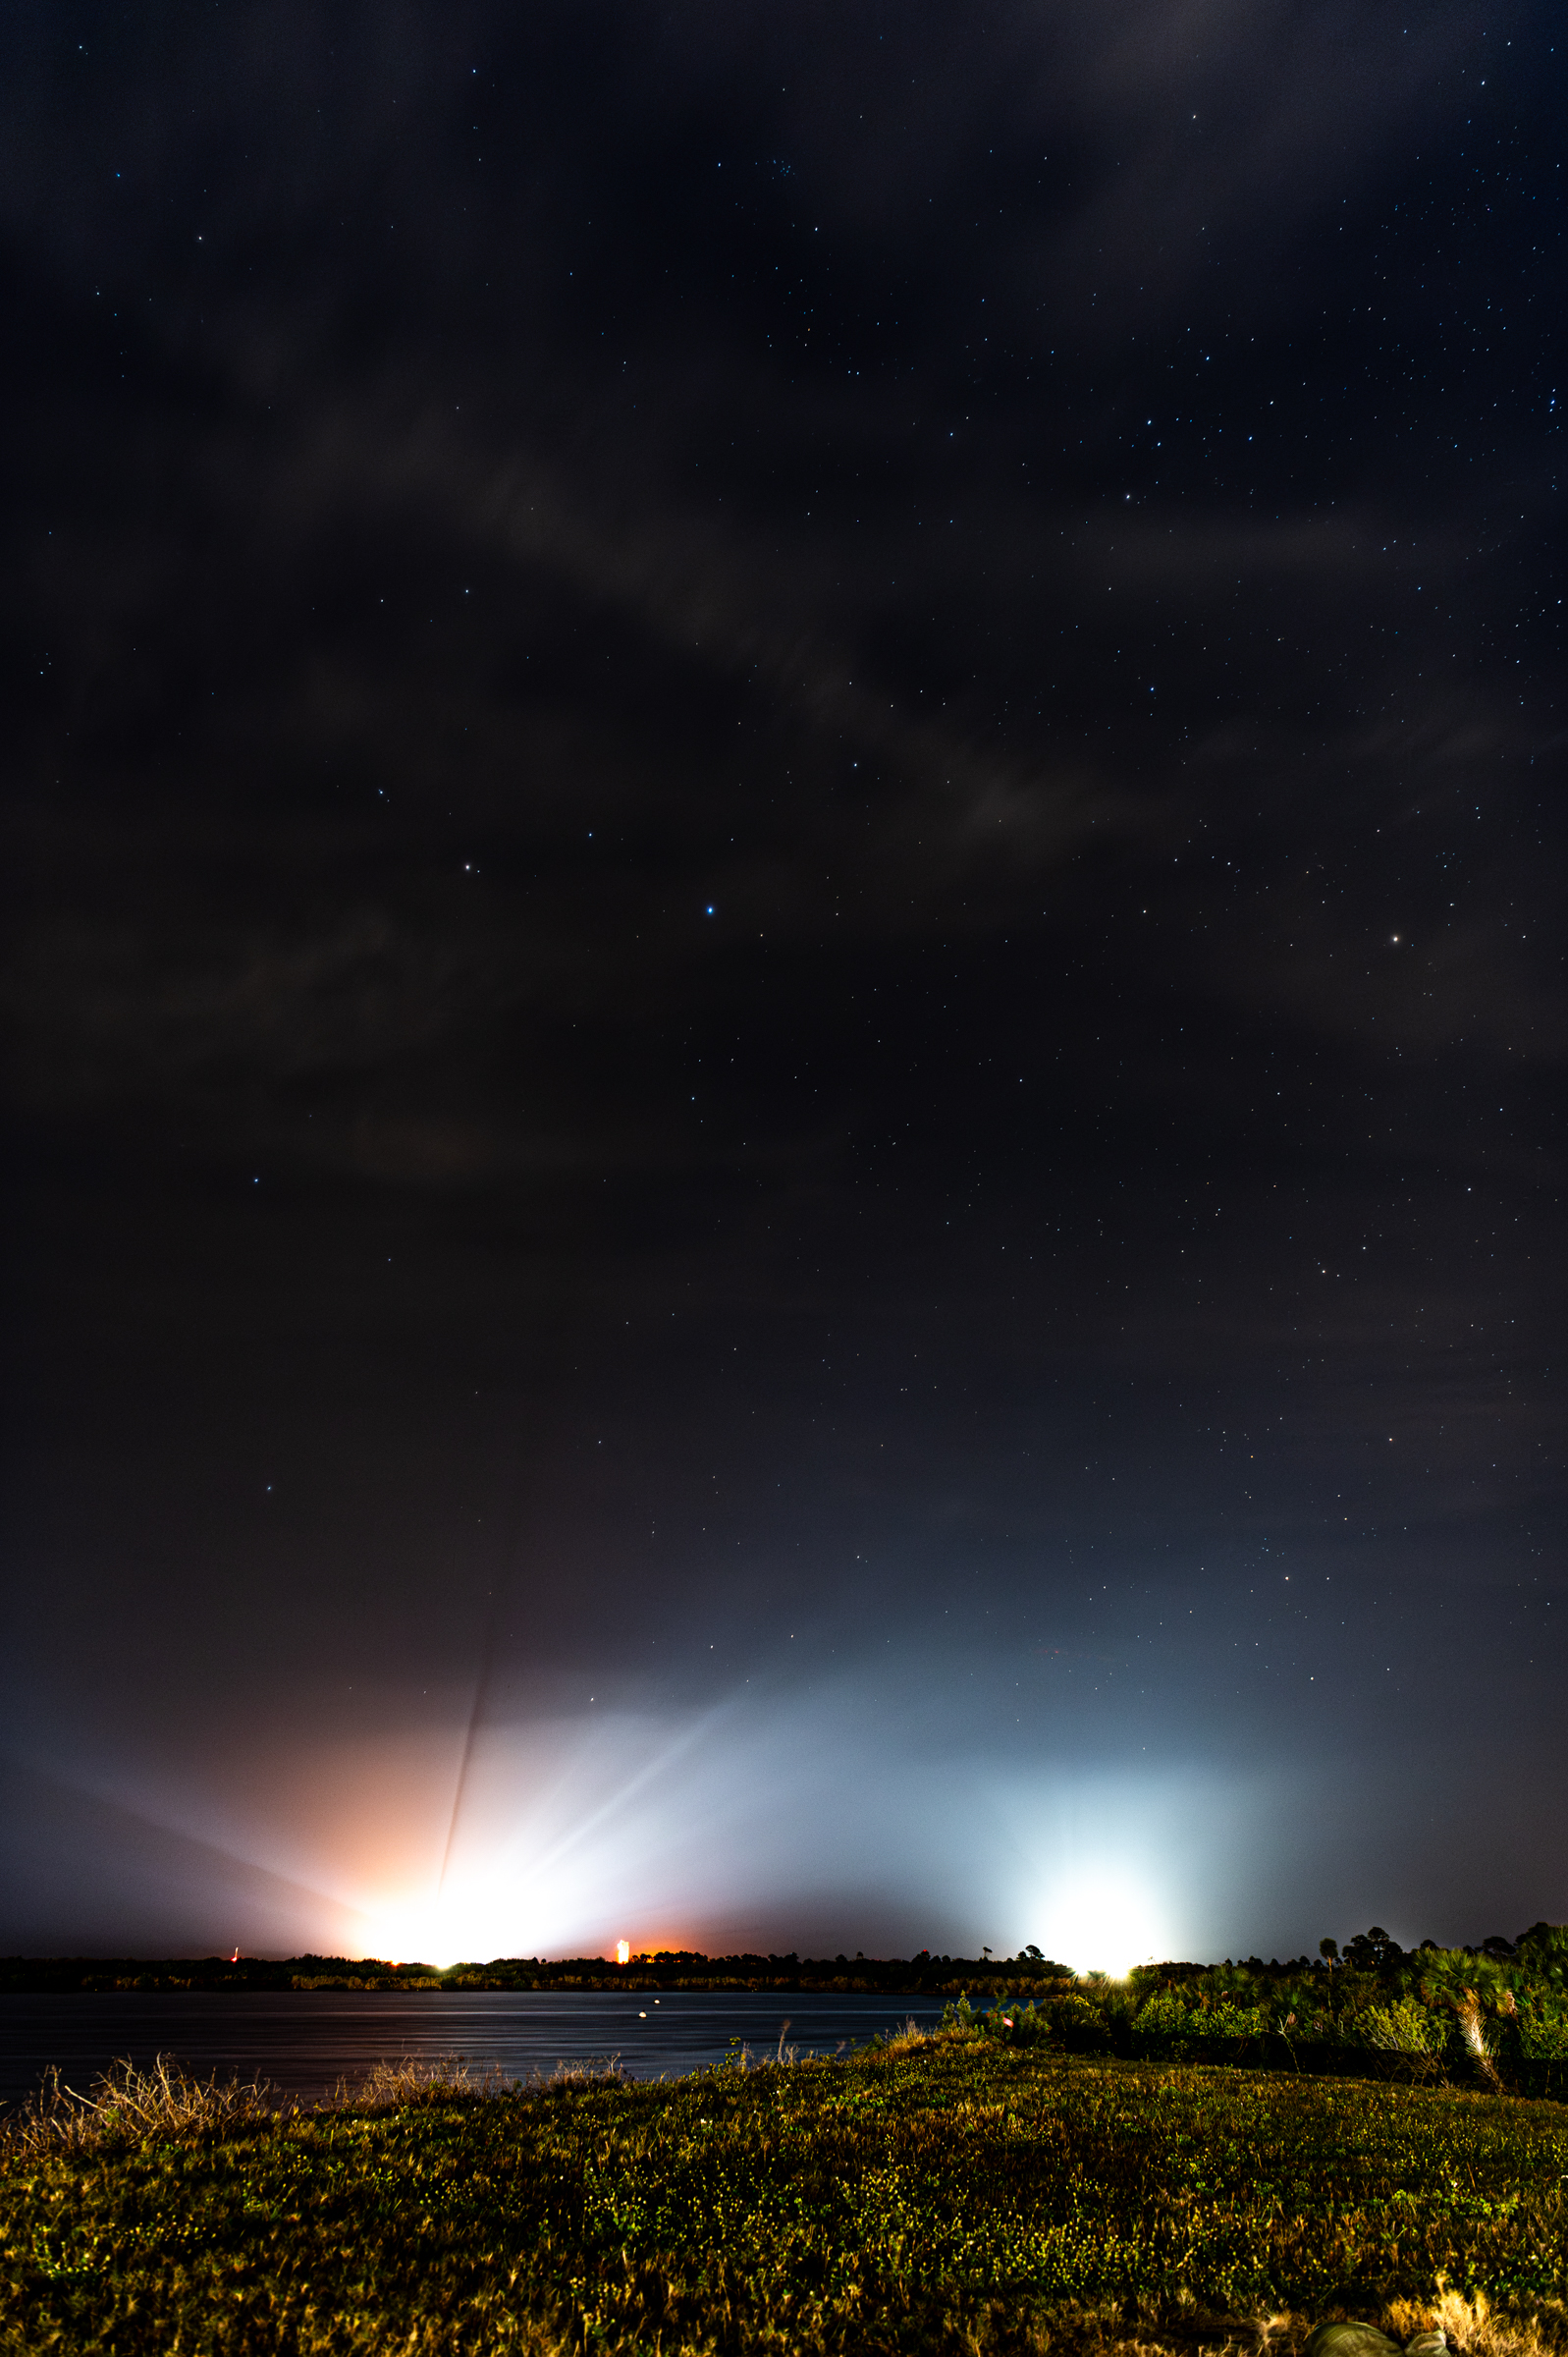 Starry night from the Press Site lawn looking towards SLC-41 and SLC-40